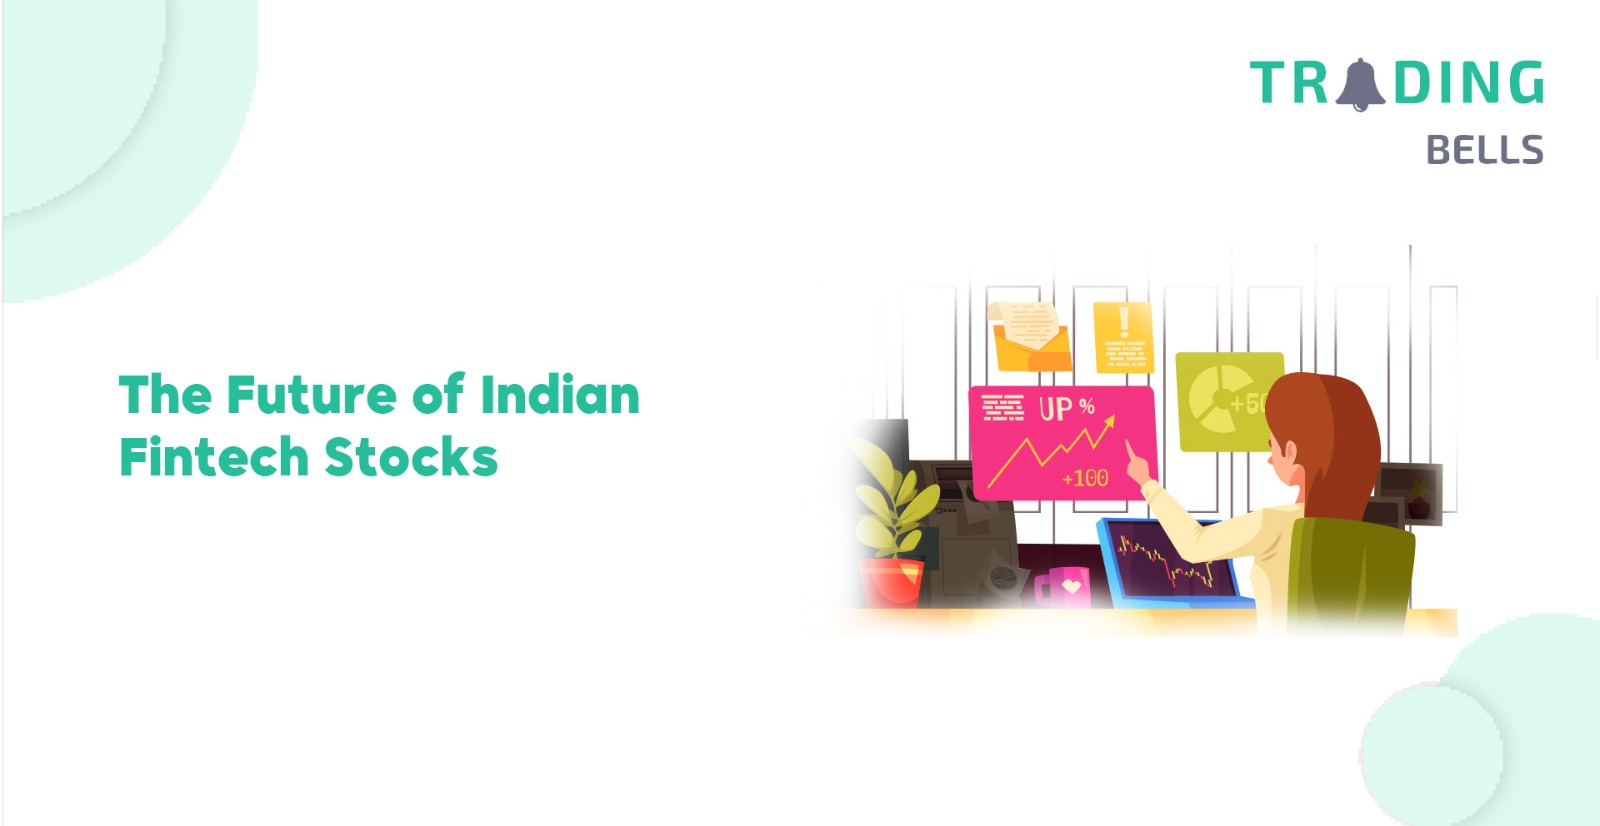 The Future of Indian Fintech Stocks